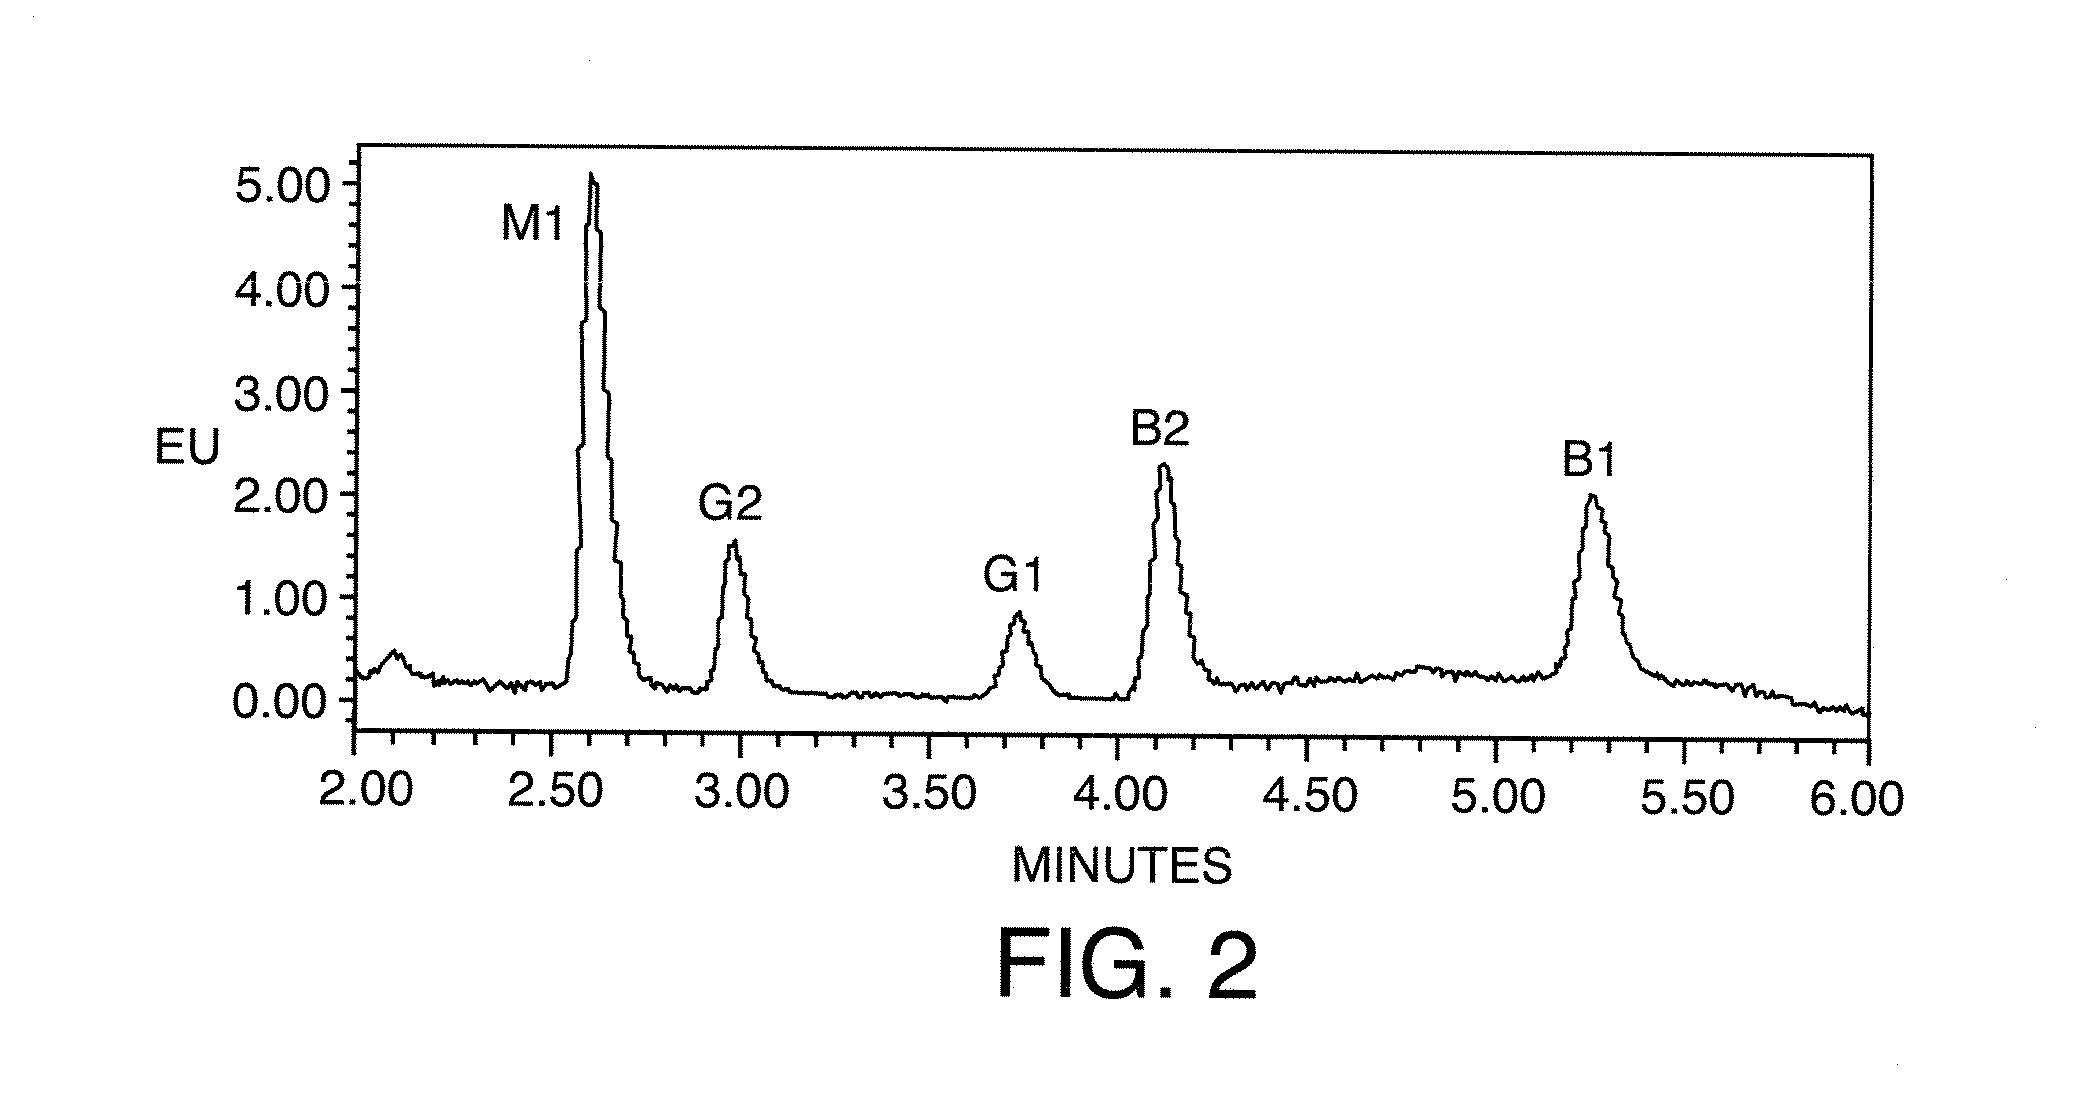 Apparatus And Methods For Performing Photoreactions And Analytical Methods And Devices To Detect Photo-Reacting Compounds